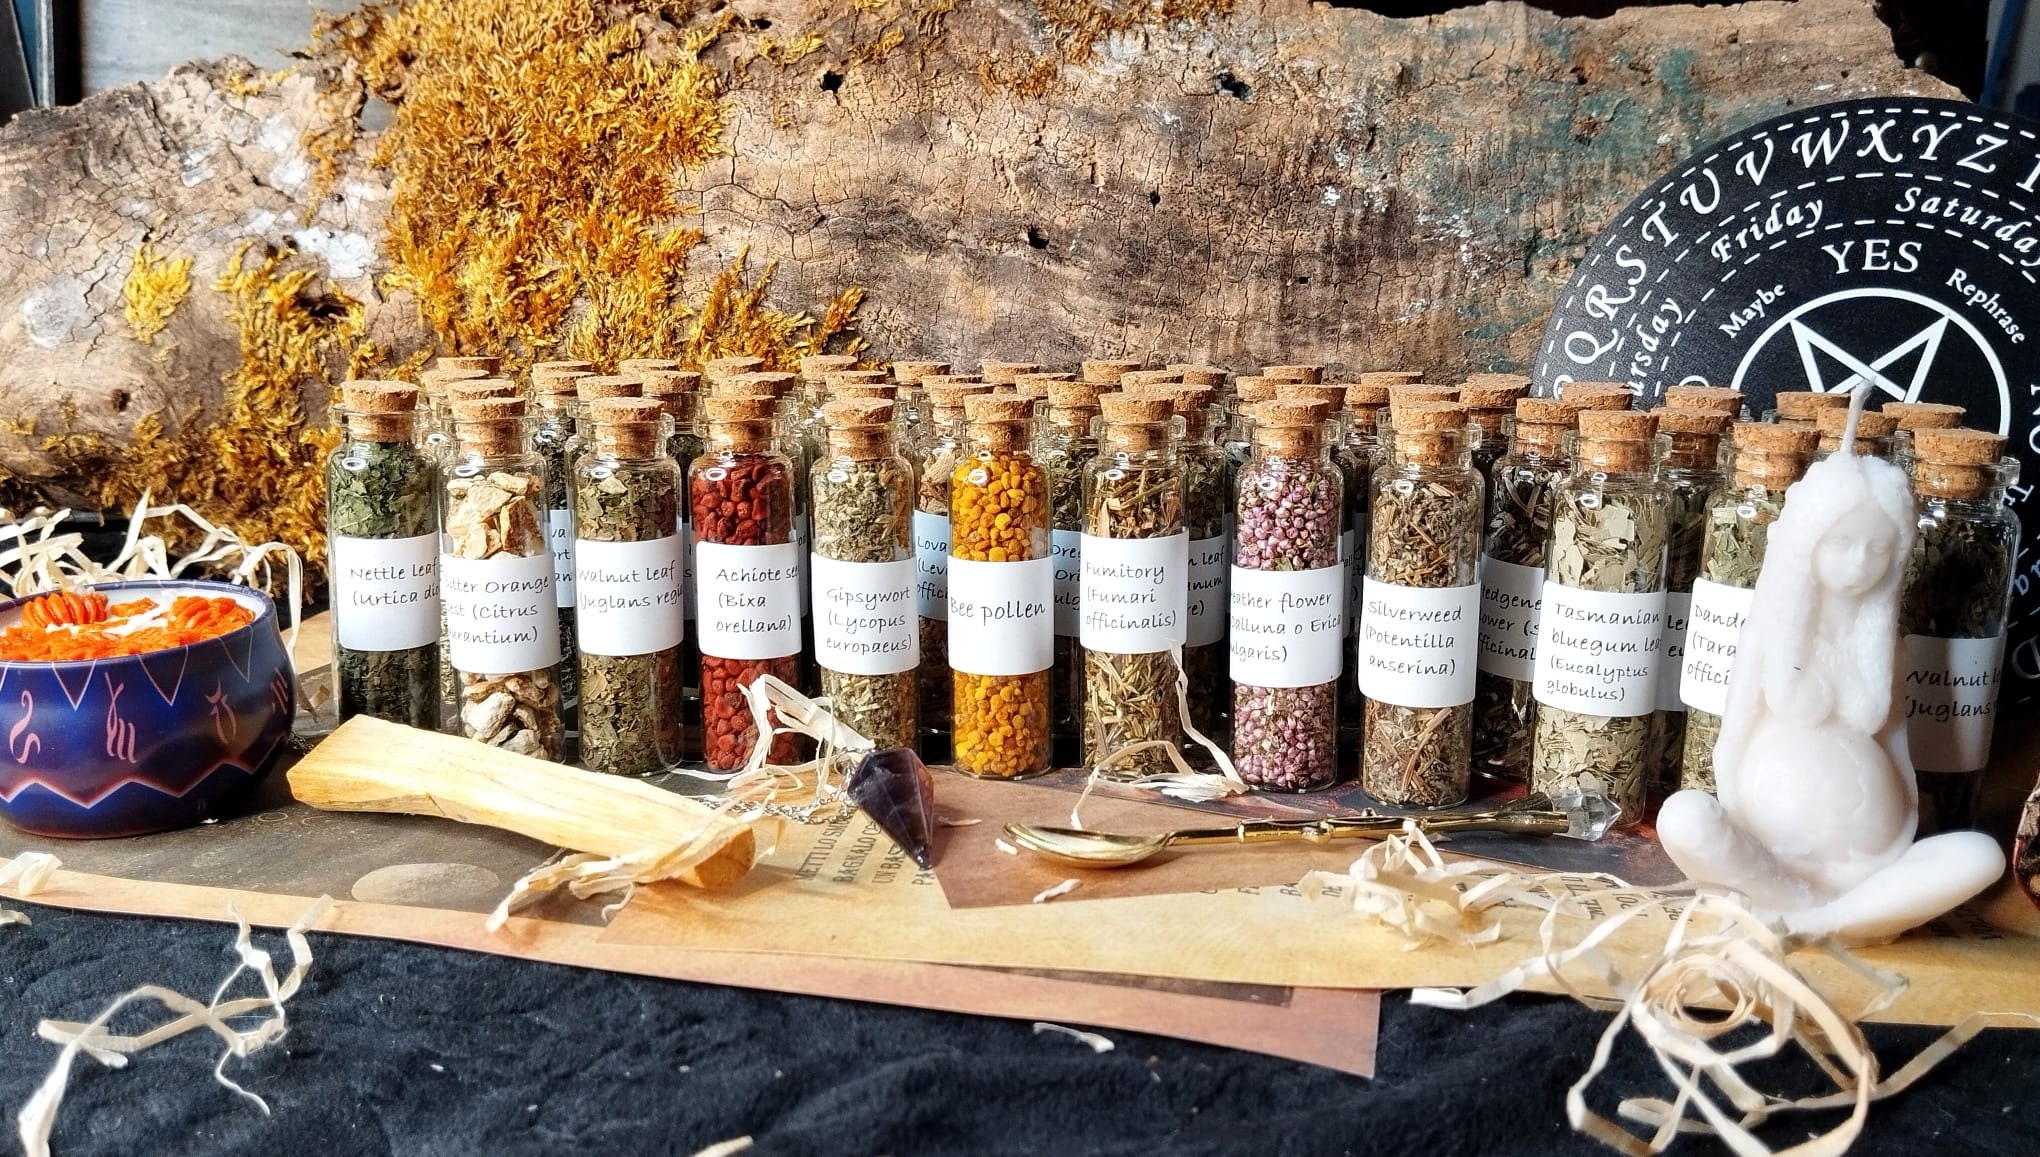 Apothecary, Potion, Witch, Potion Kit, Witchcraft Kit, Witch Kit, Altar,  Wiccan, Hexen Zubehör, Wiccan Supplies, Spell Kit Apothecary Kit -   Denmark